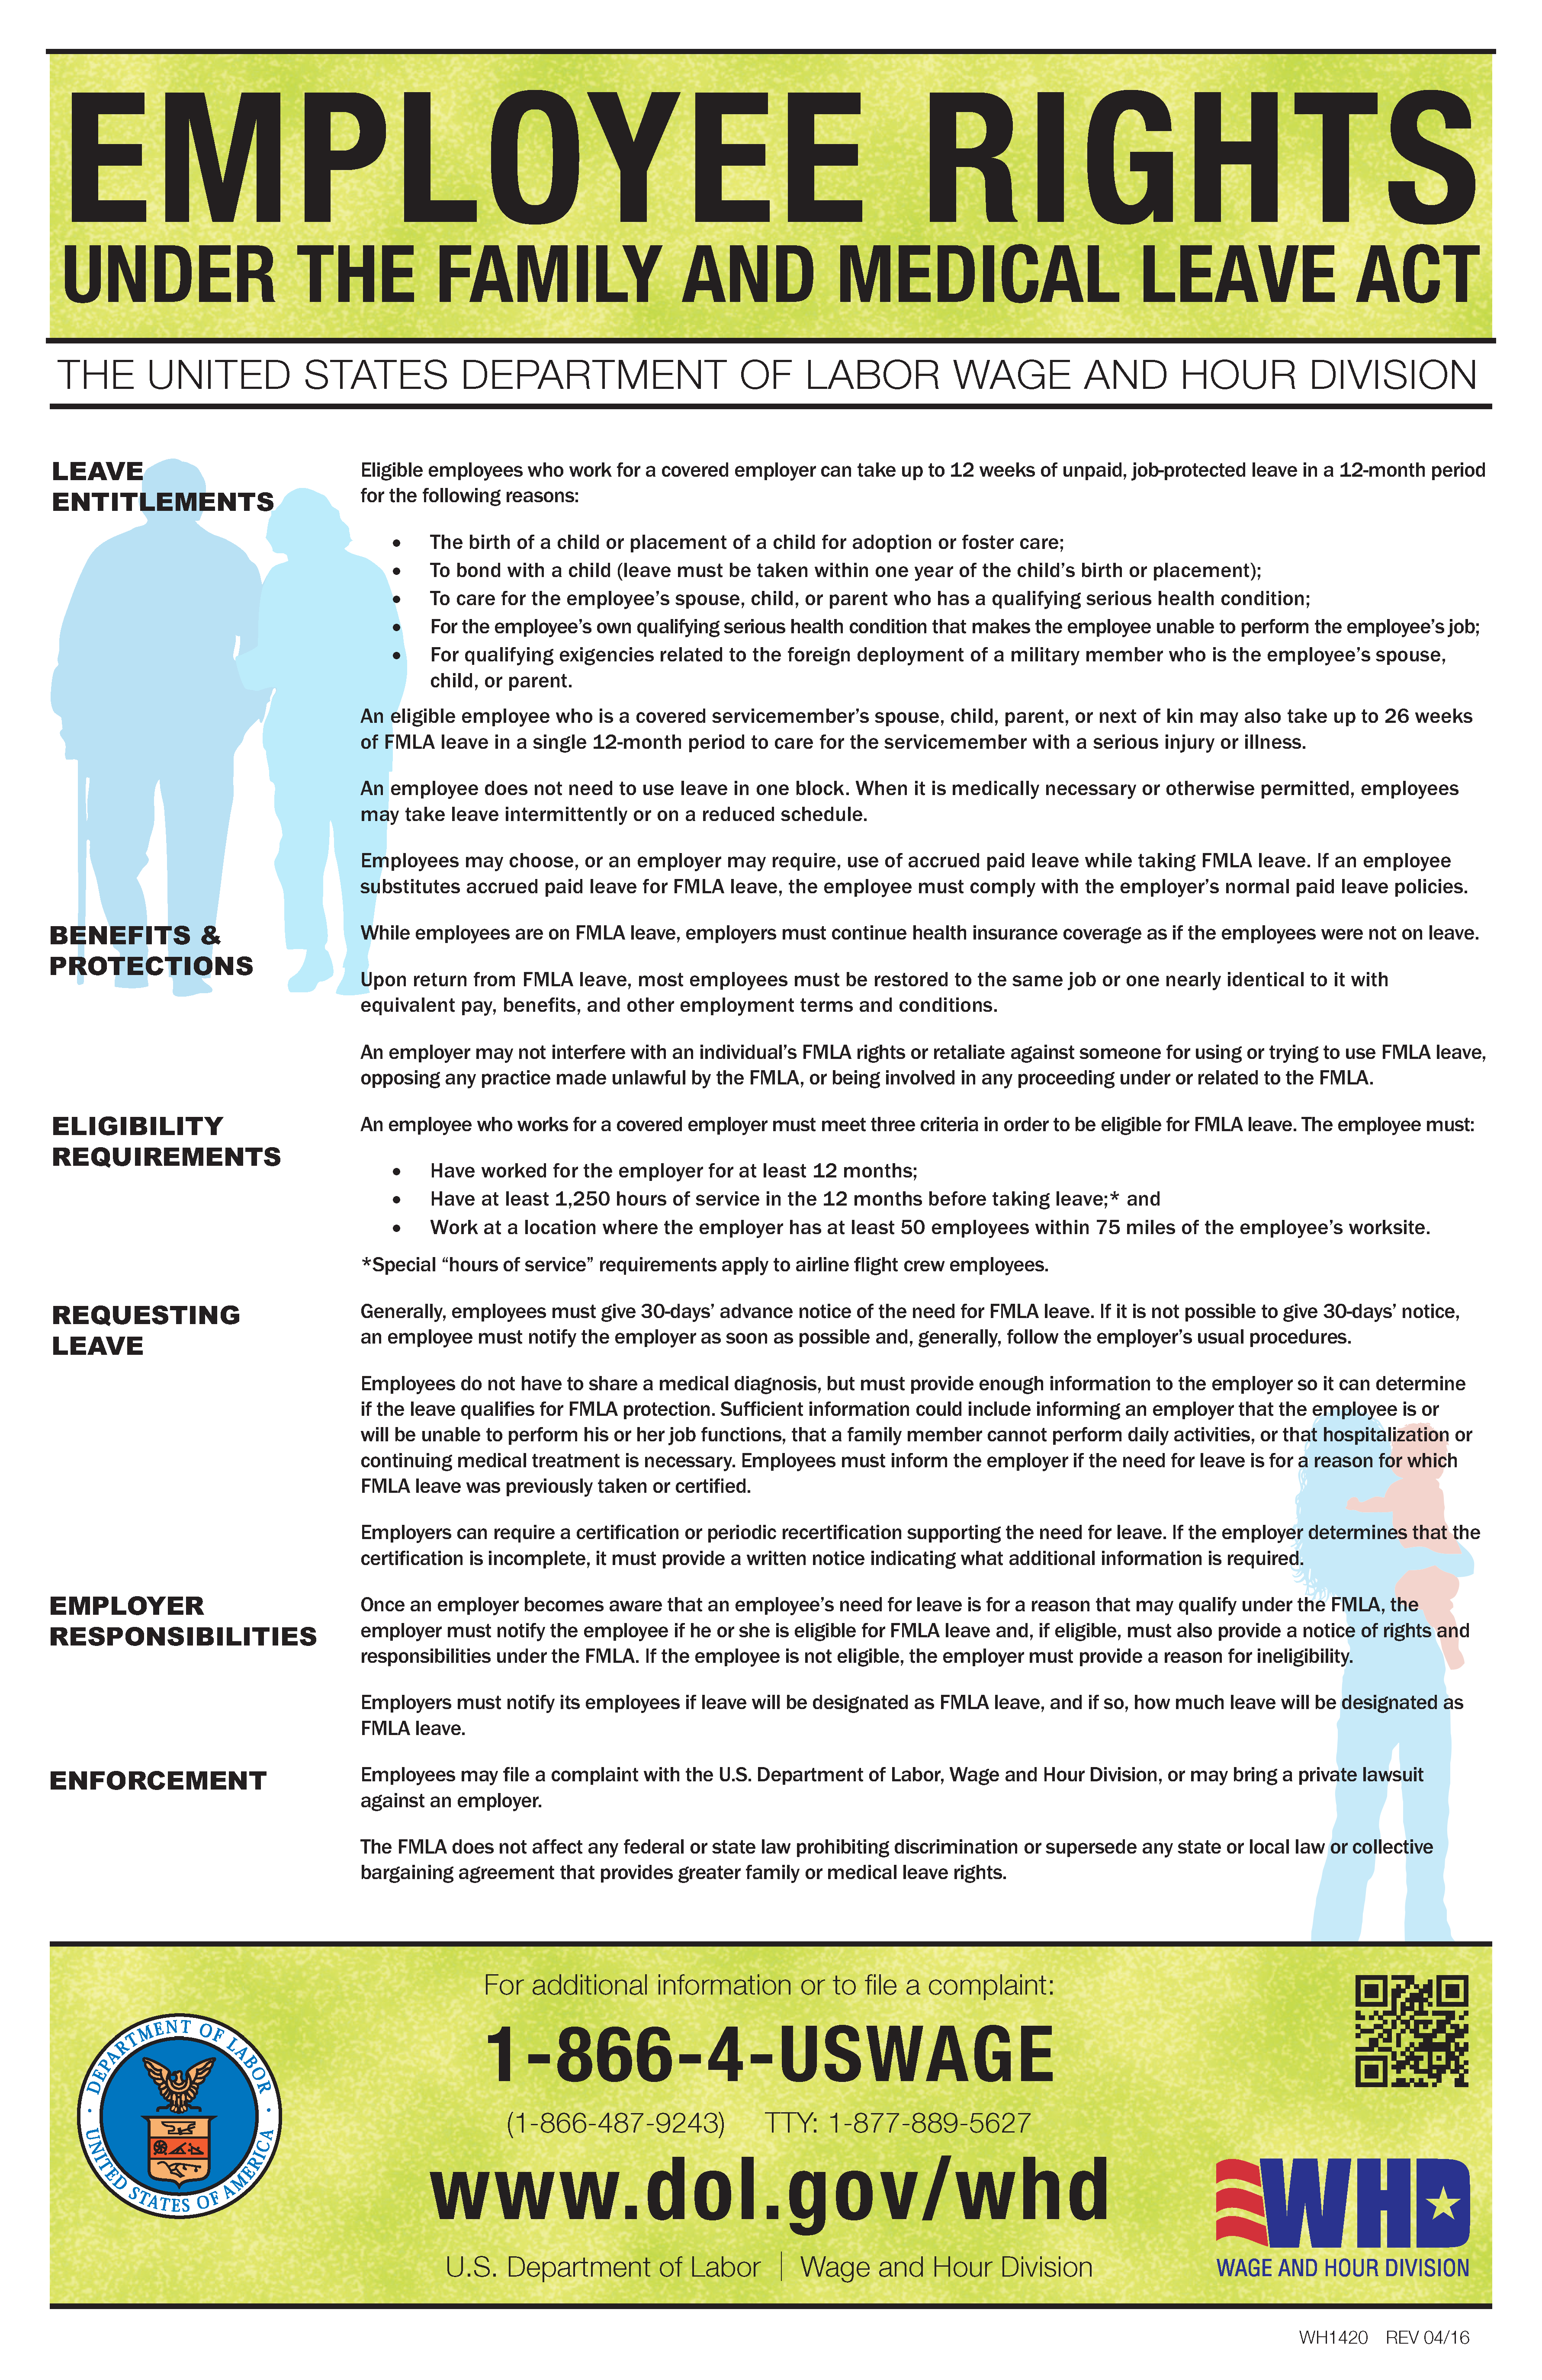 employee rights and responsibilites poster